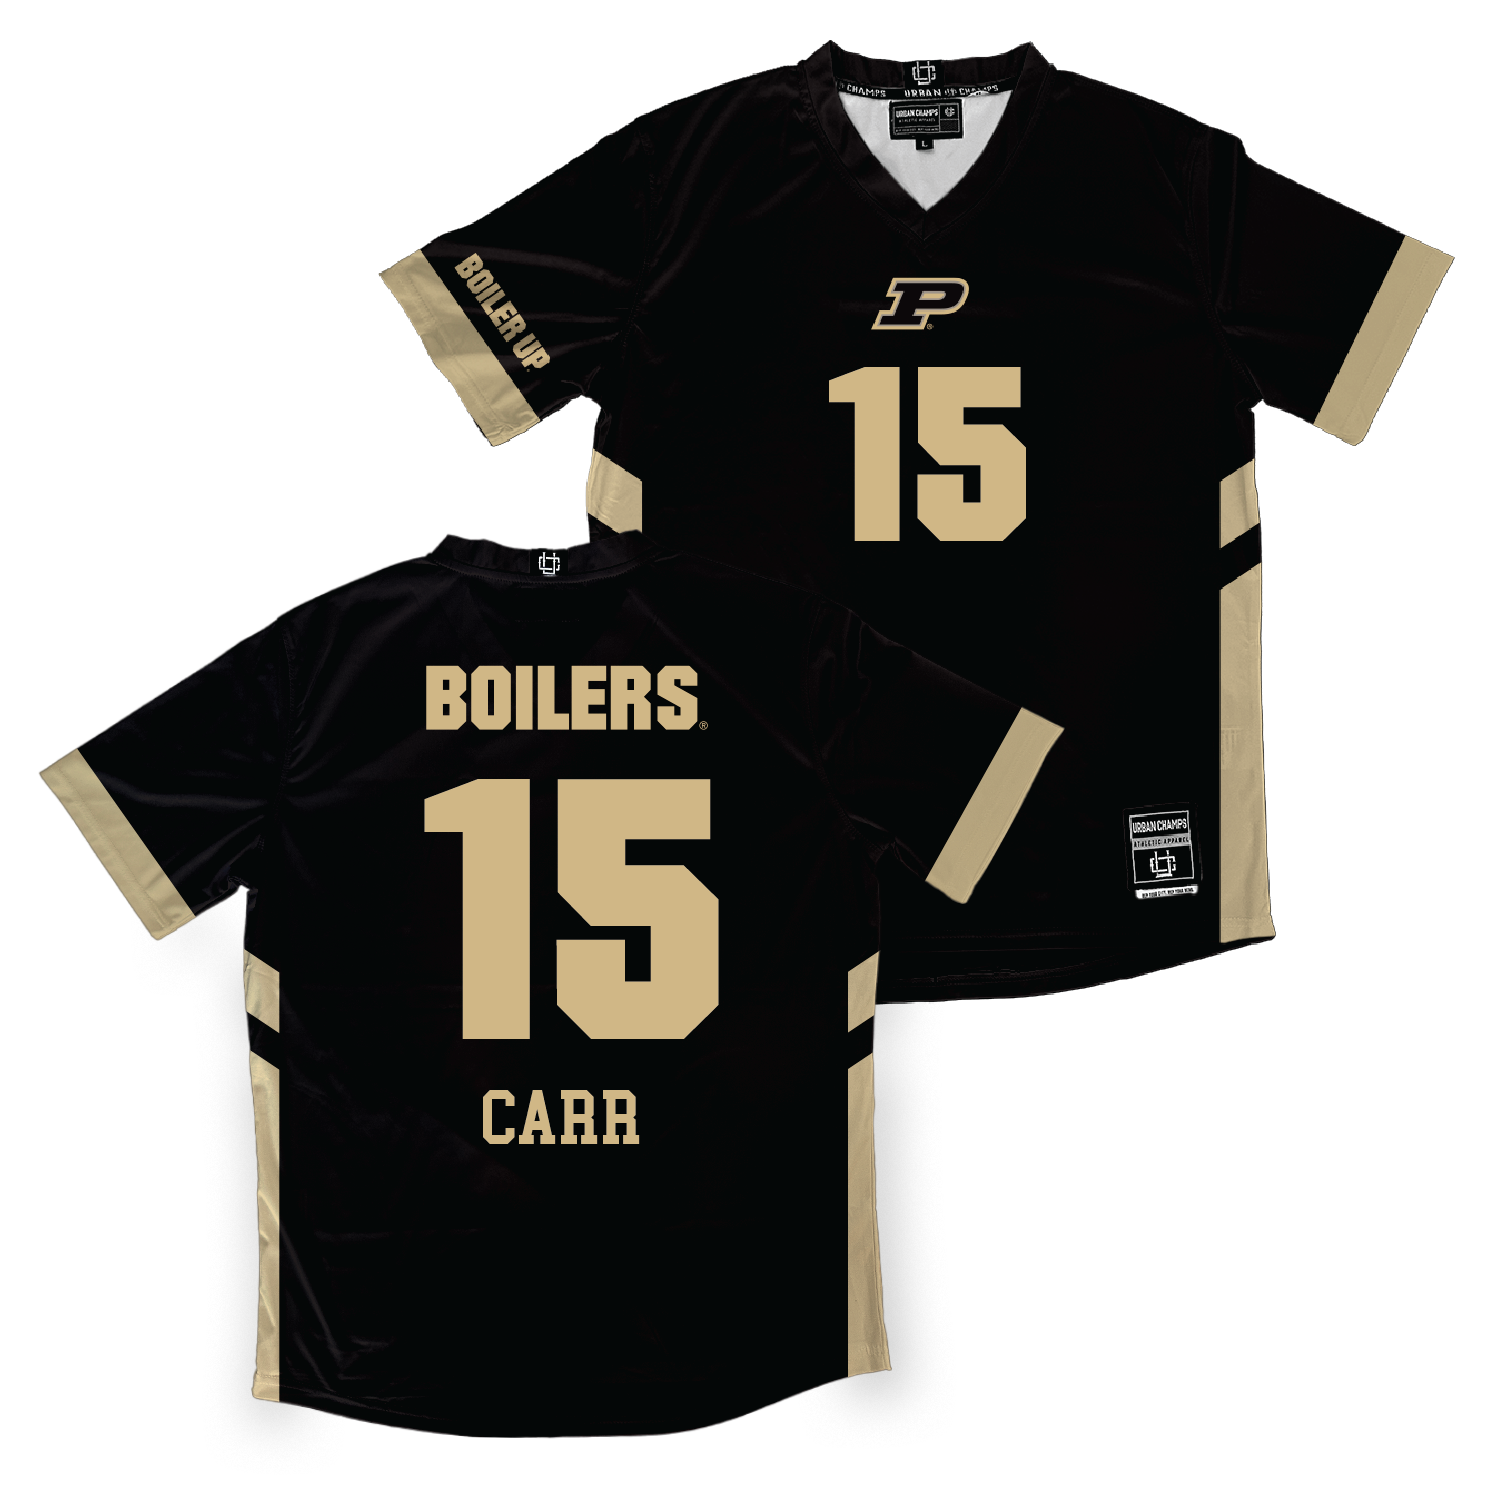 Black Purdue Women's Volleyball Jersey - Elizabeth Carr | #15 Youth Small